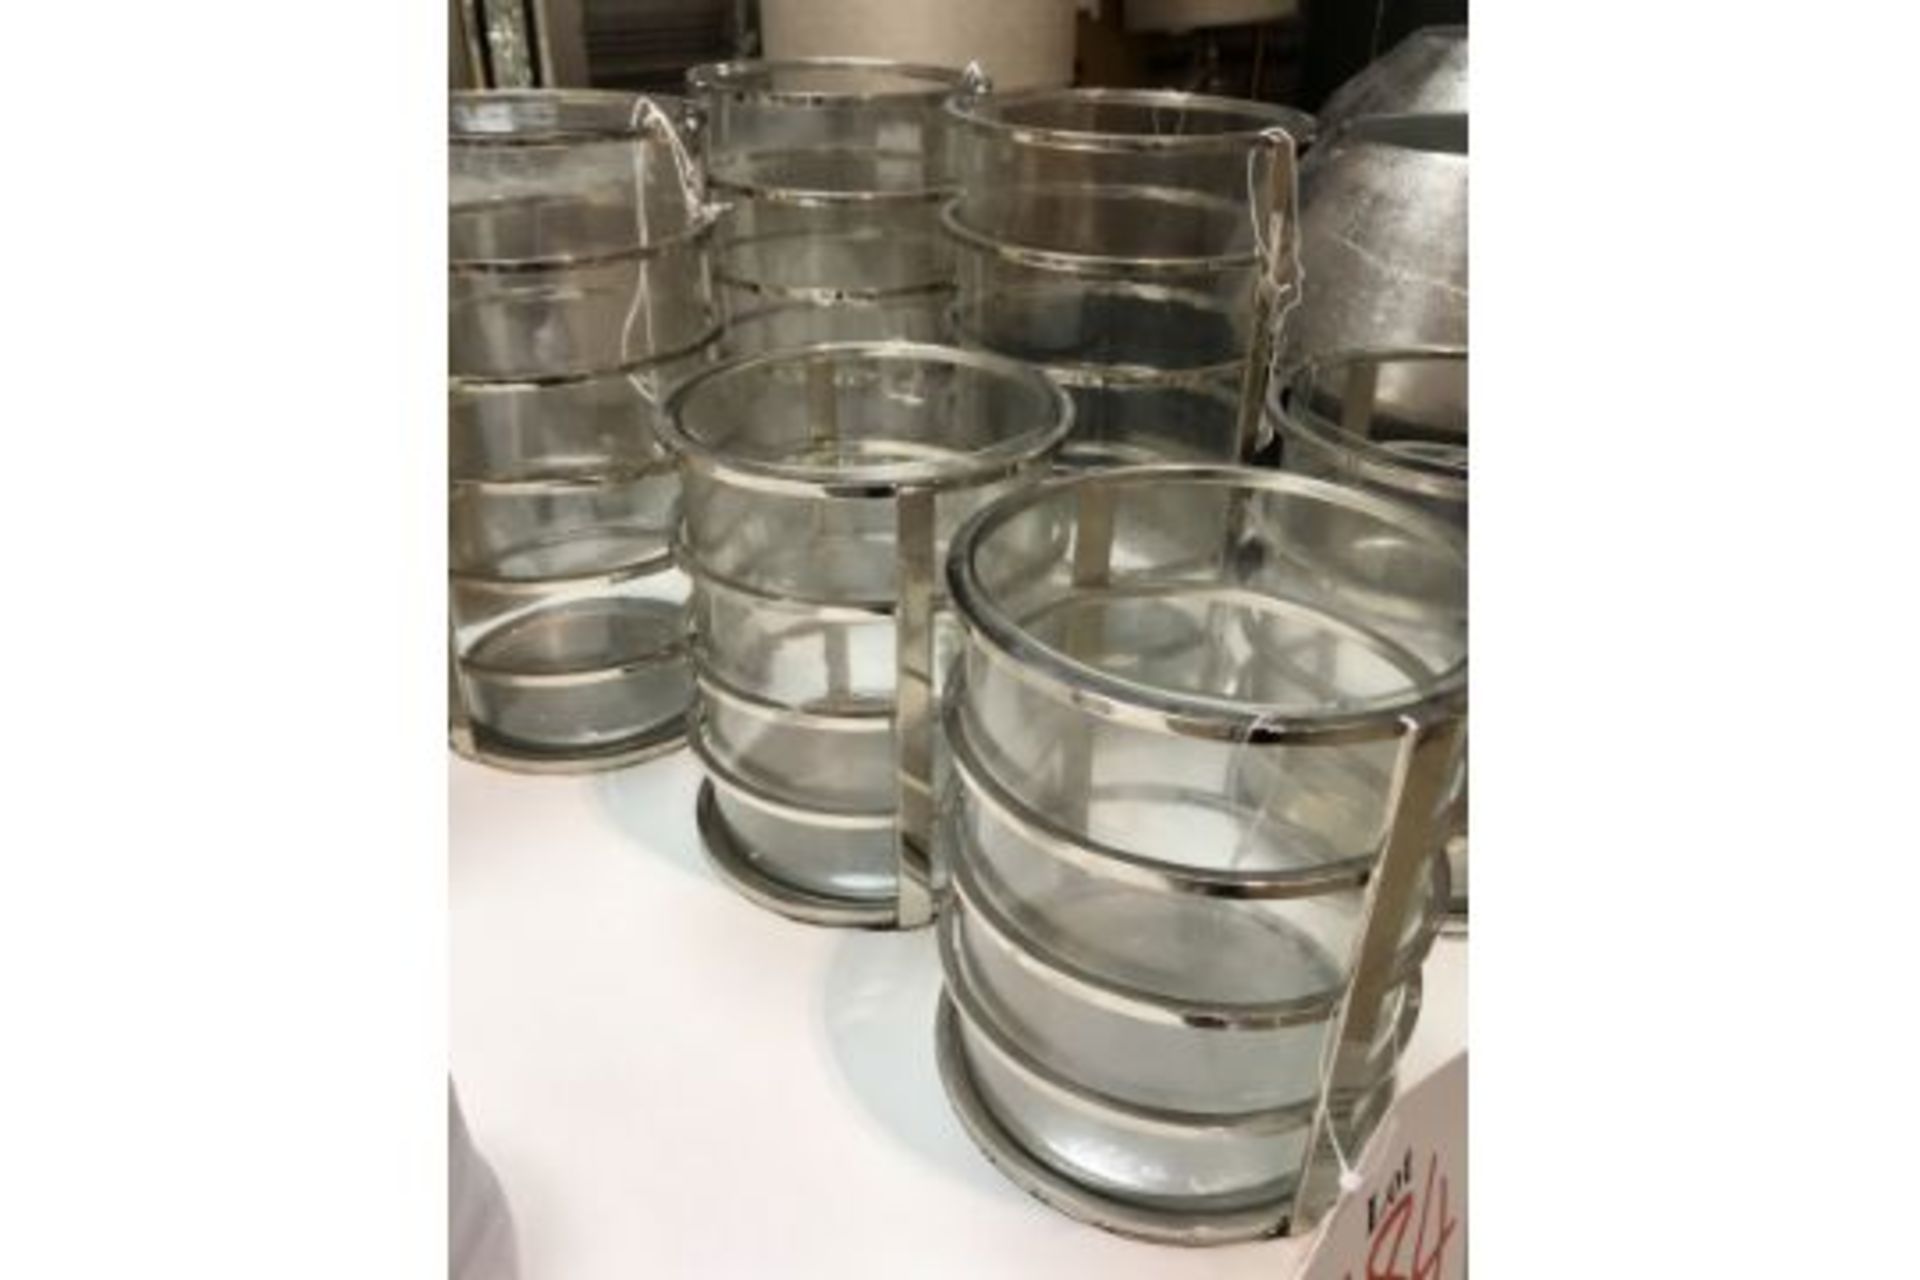 6 x Ex Display Chrome Glass Candle Holders w/ Libra Candles - Image 3 of 4